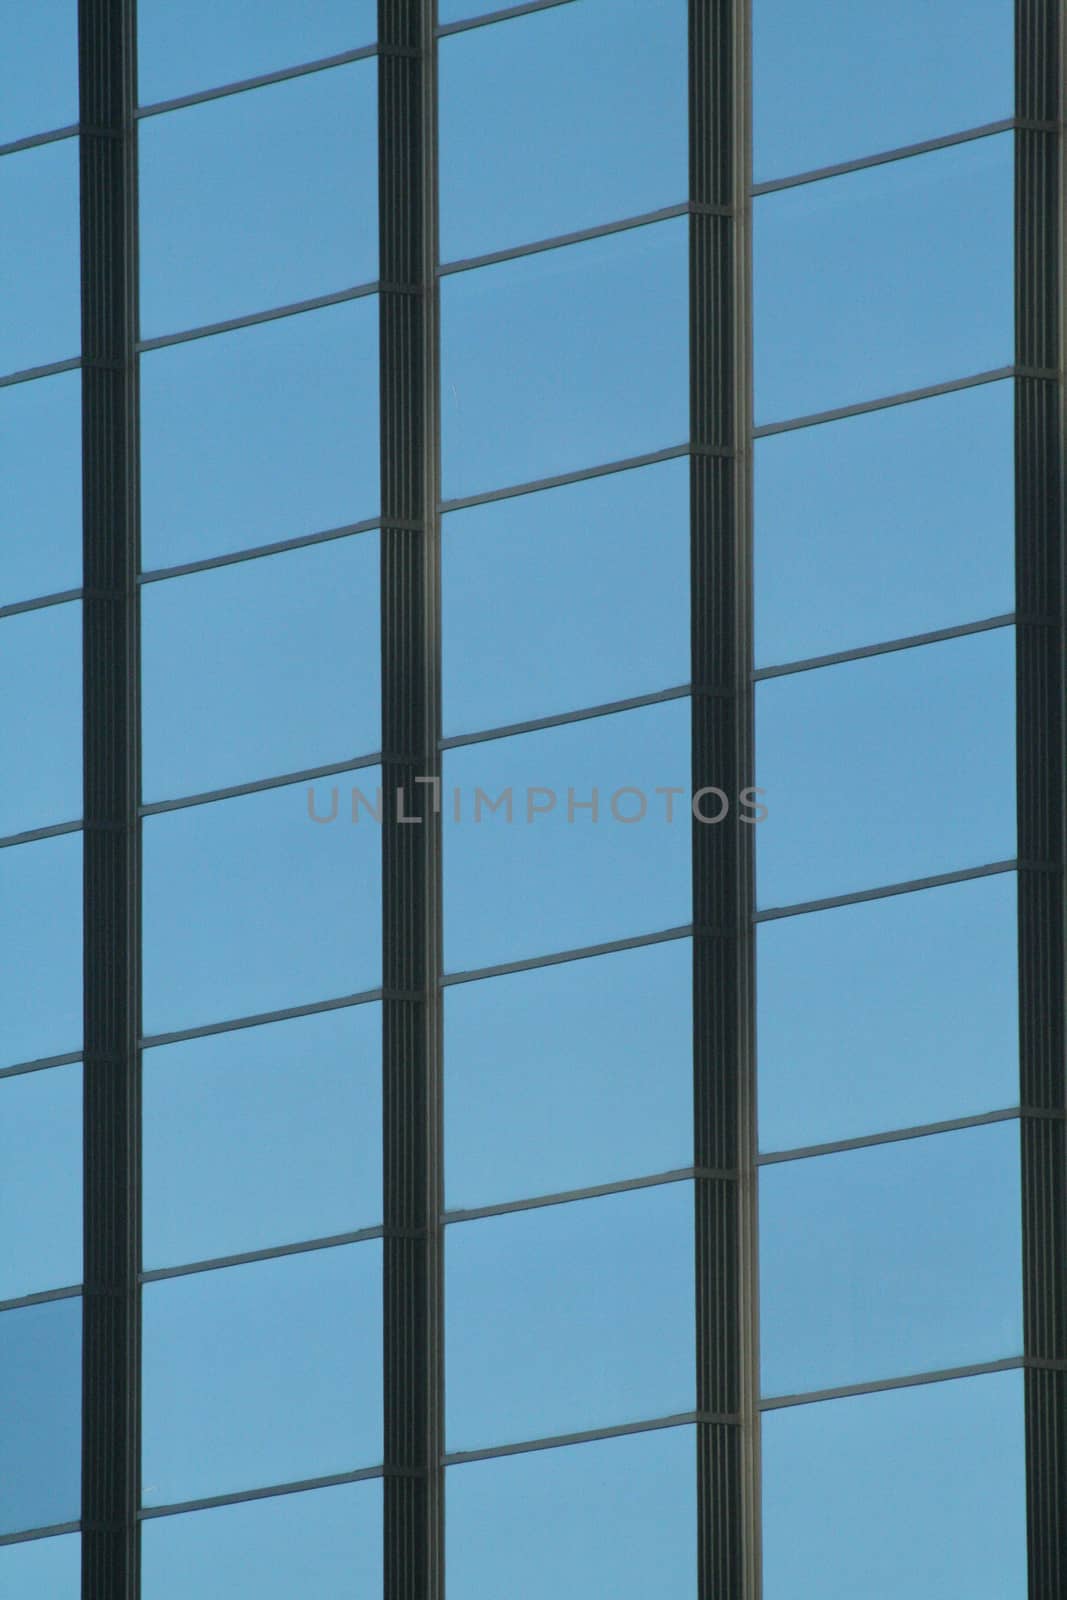 Skyscraper office tower block windows in lines semi abstract shot in business district downtown Madrid Spain. 